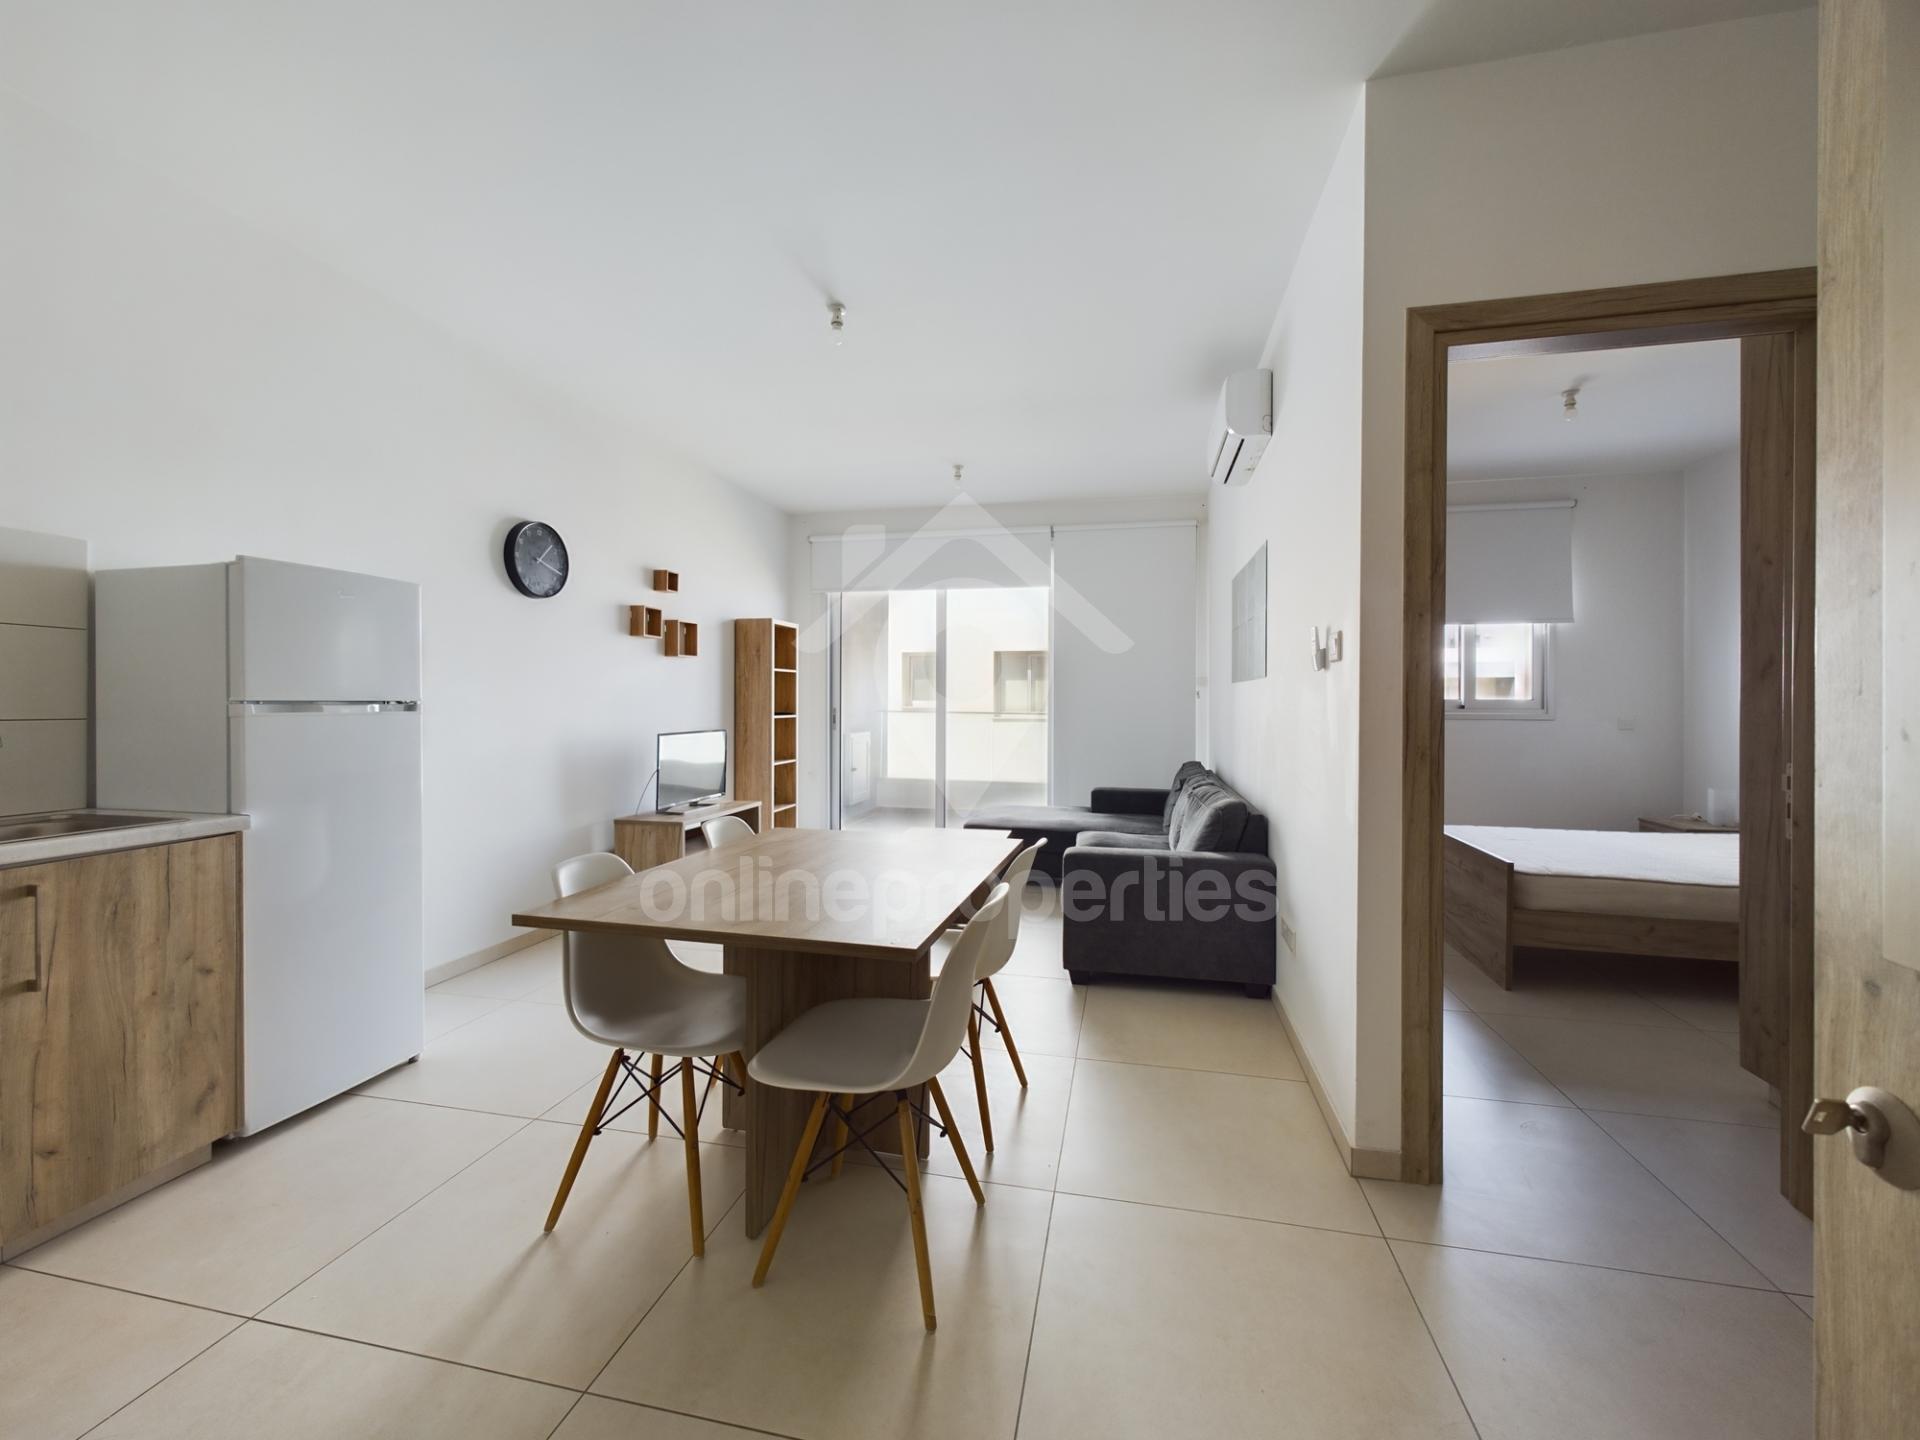 Fully furnished one bedroom flat, close to UNIC 